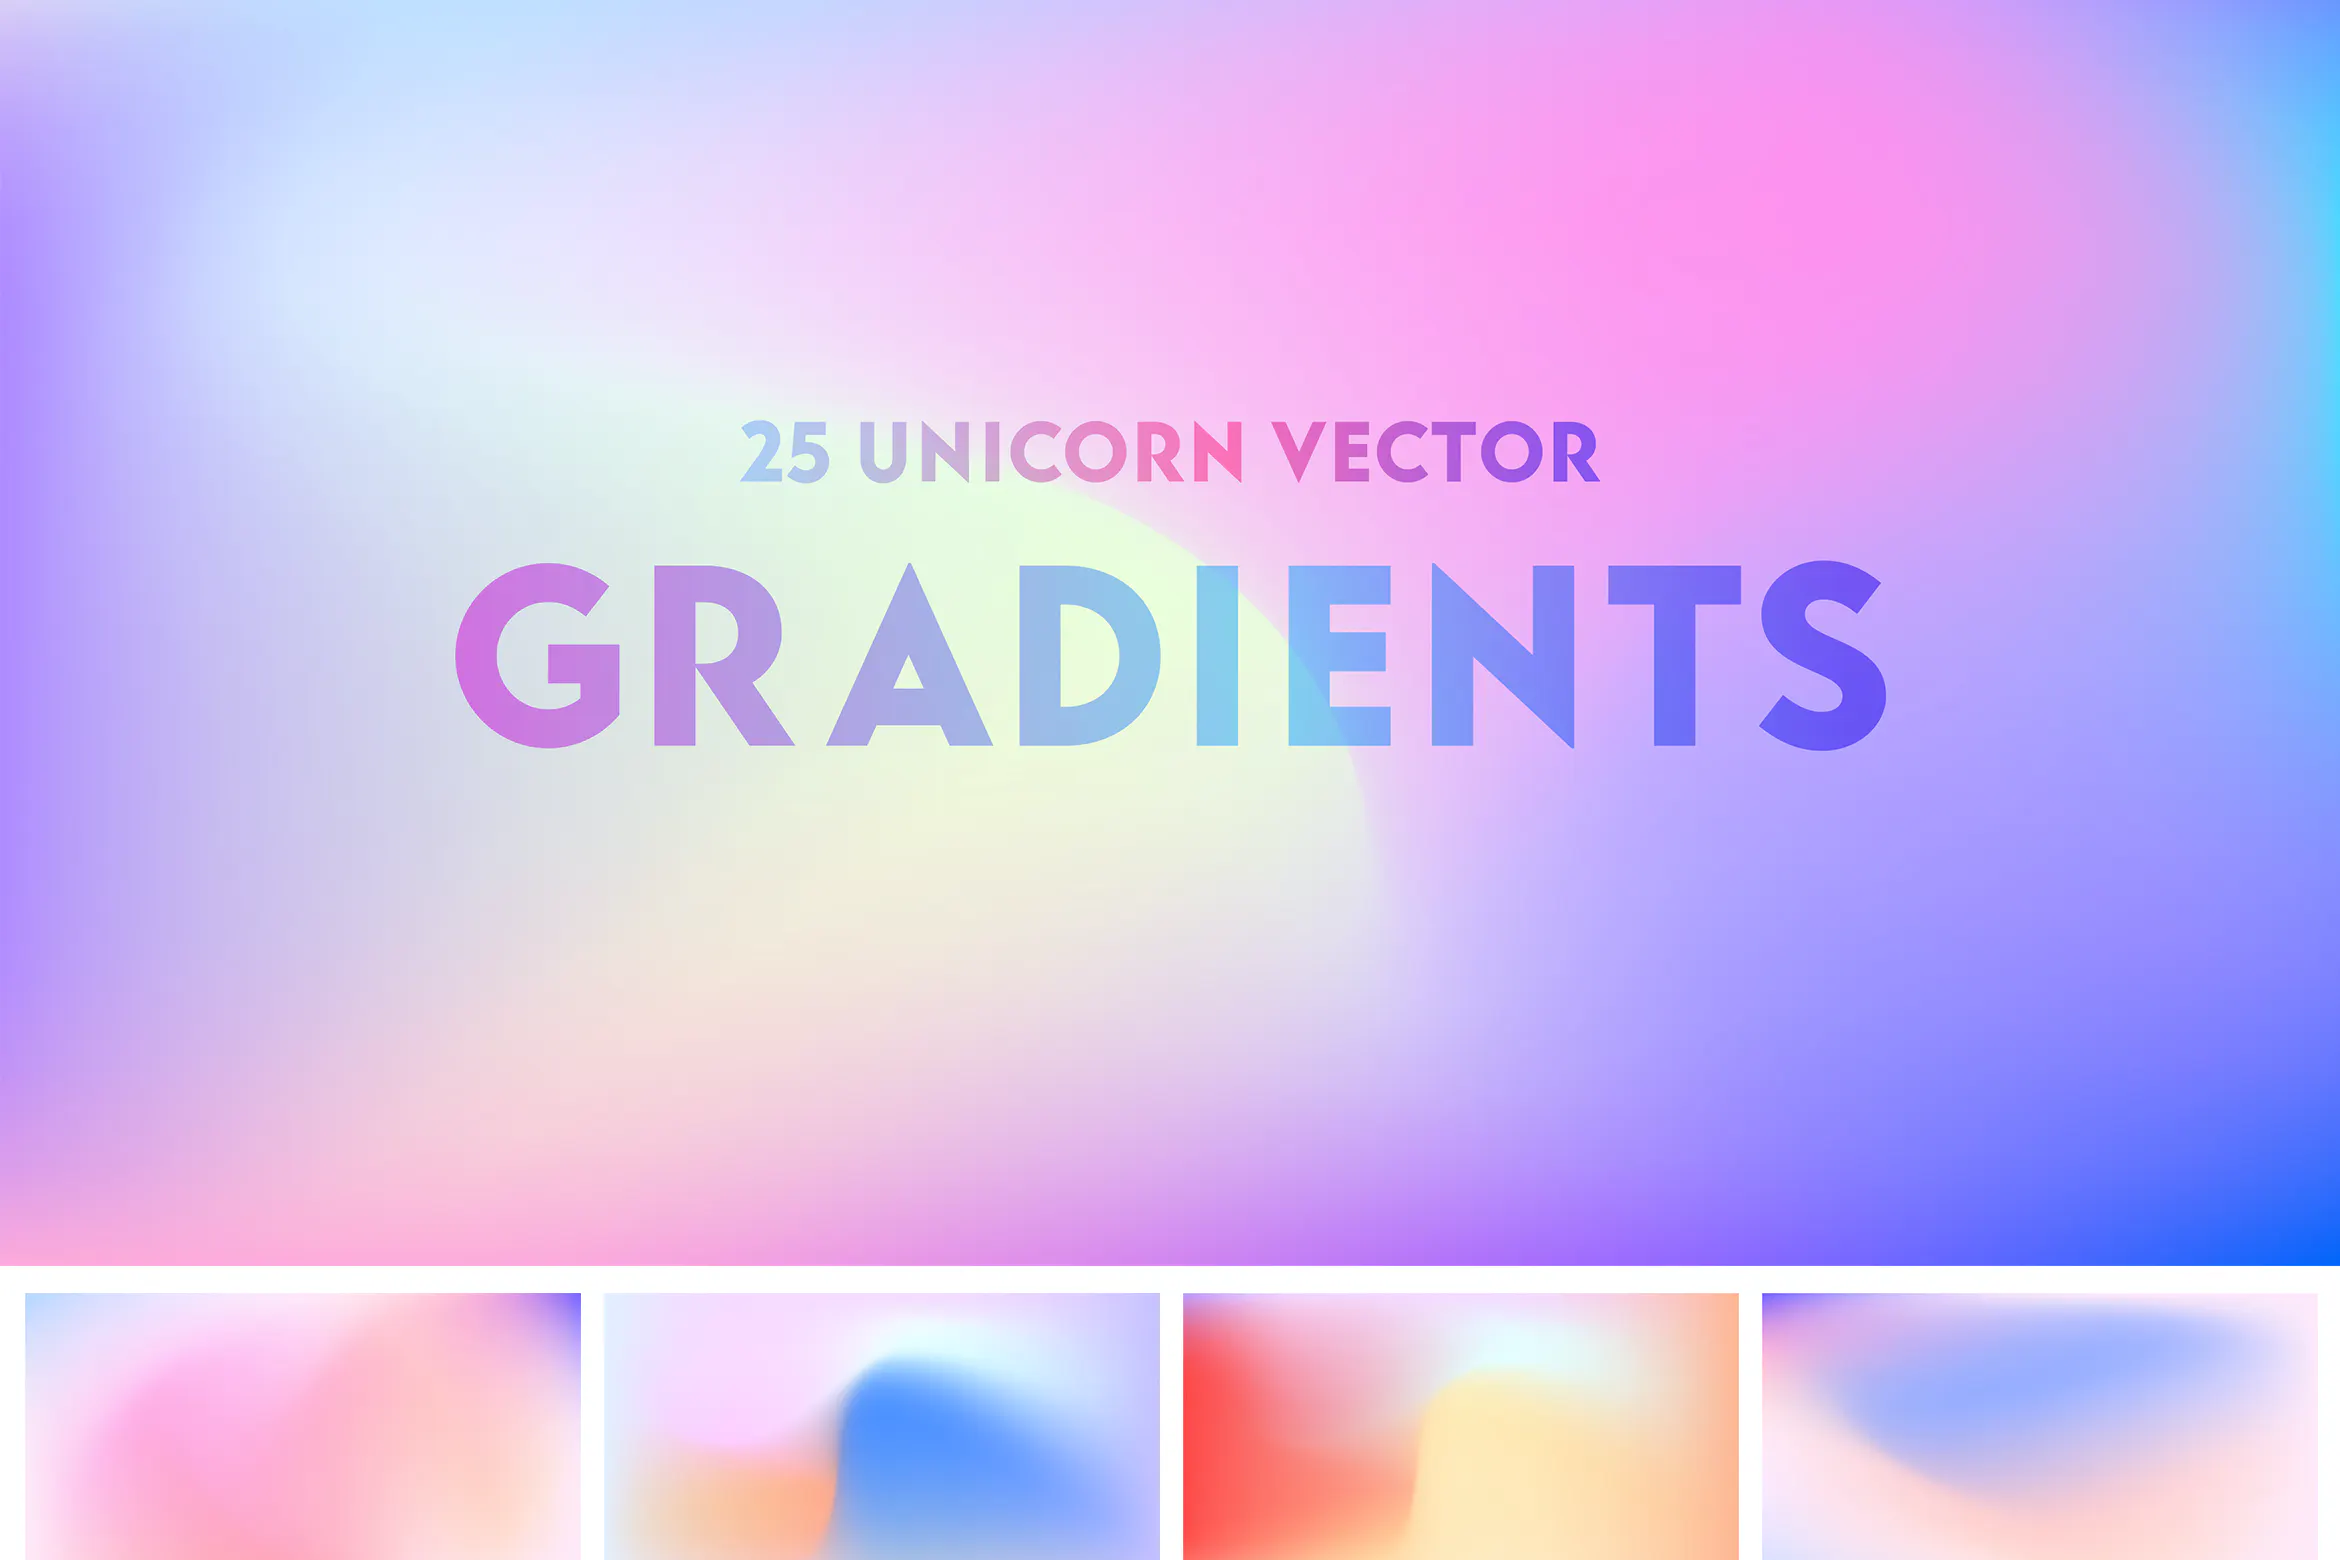 Unicorn Vector Gradients - Colorful Background
